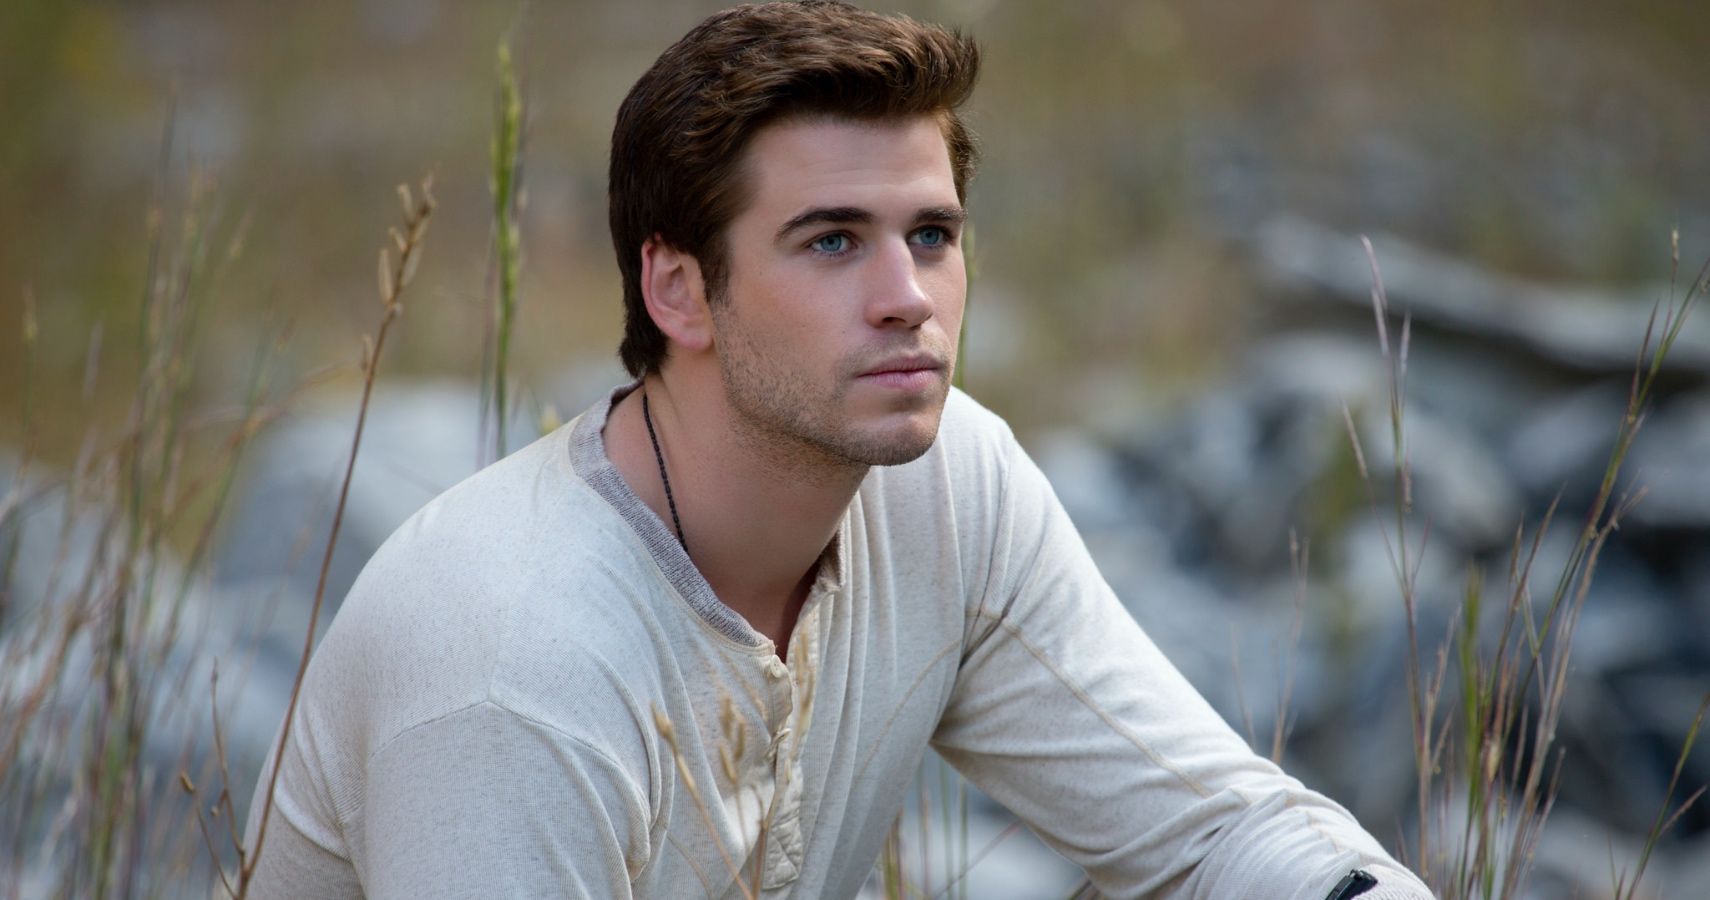 Gale Hawthorne was Katniss Everdeen's best friend and hunting partner and one of the main characters.